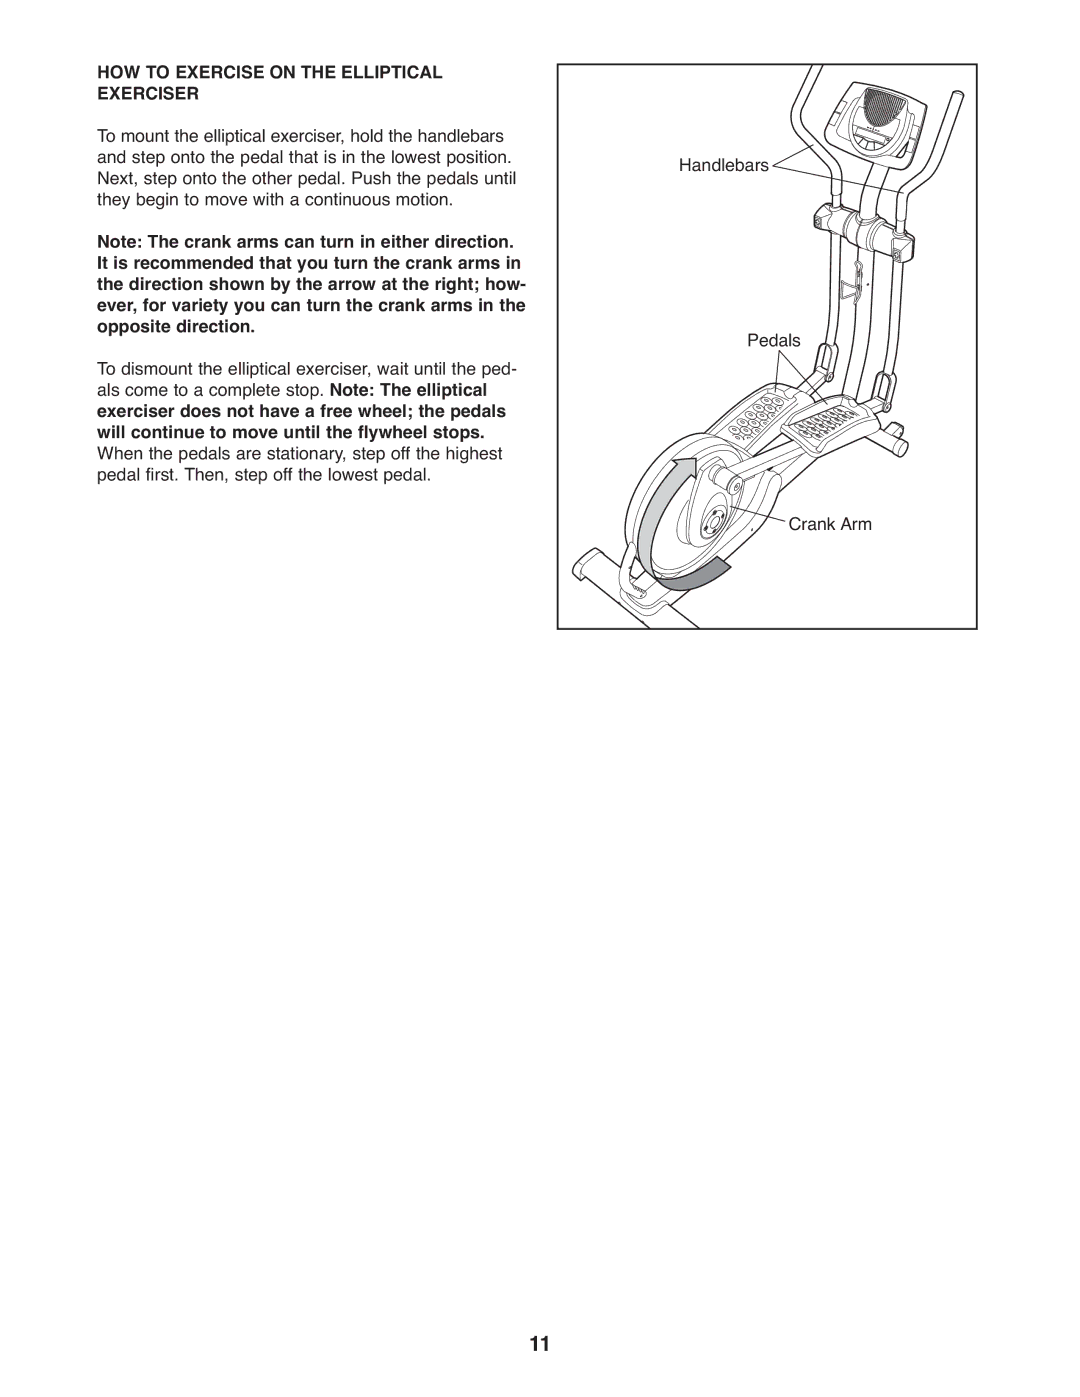 ProForm PFEL5105.1 user manual HOW to Exercise on the Elliptical Exerciser 